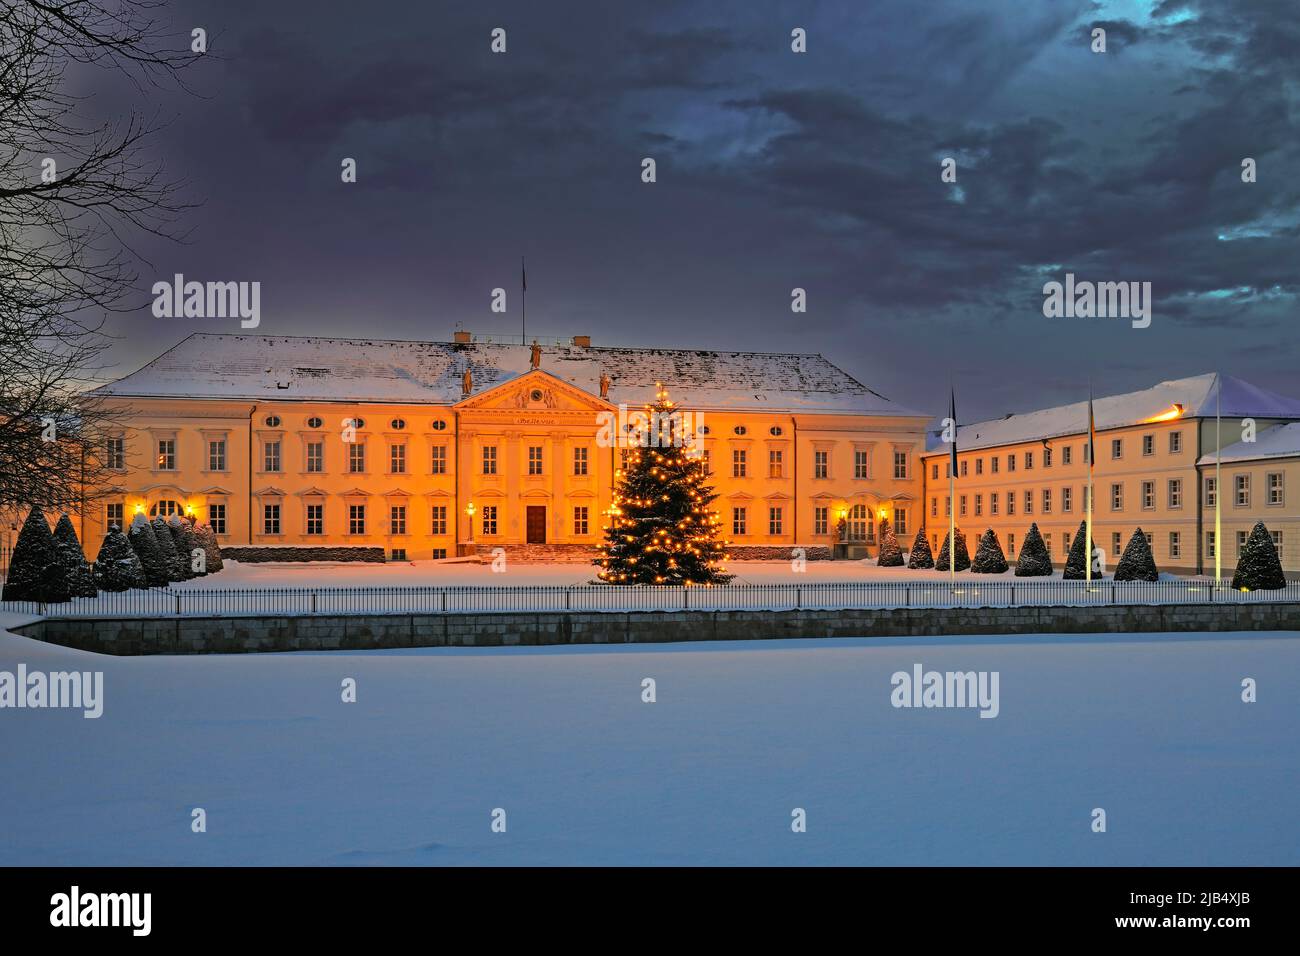 Bellevue Palace in the evening, seat of the German Federal President, with Christmas tree at Christmas time, Berlin, Germany Stock Photo